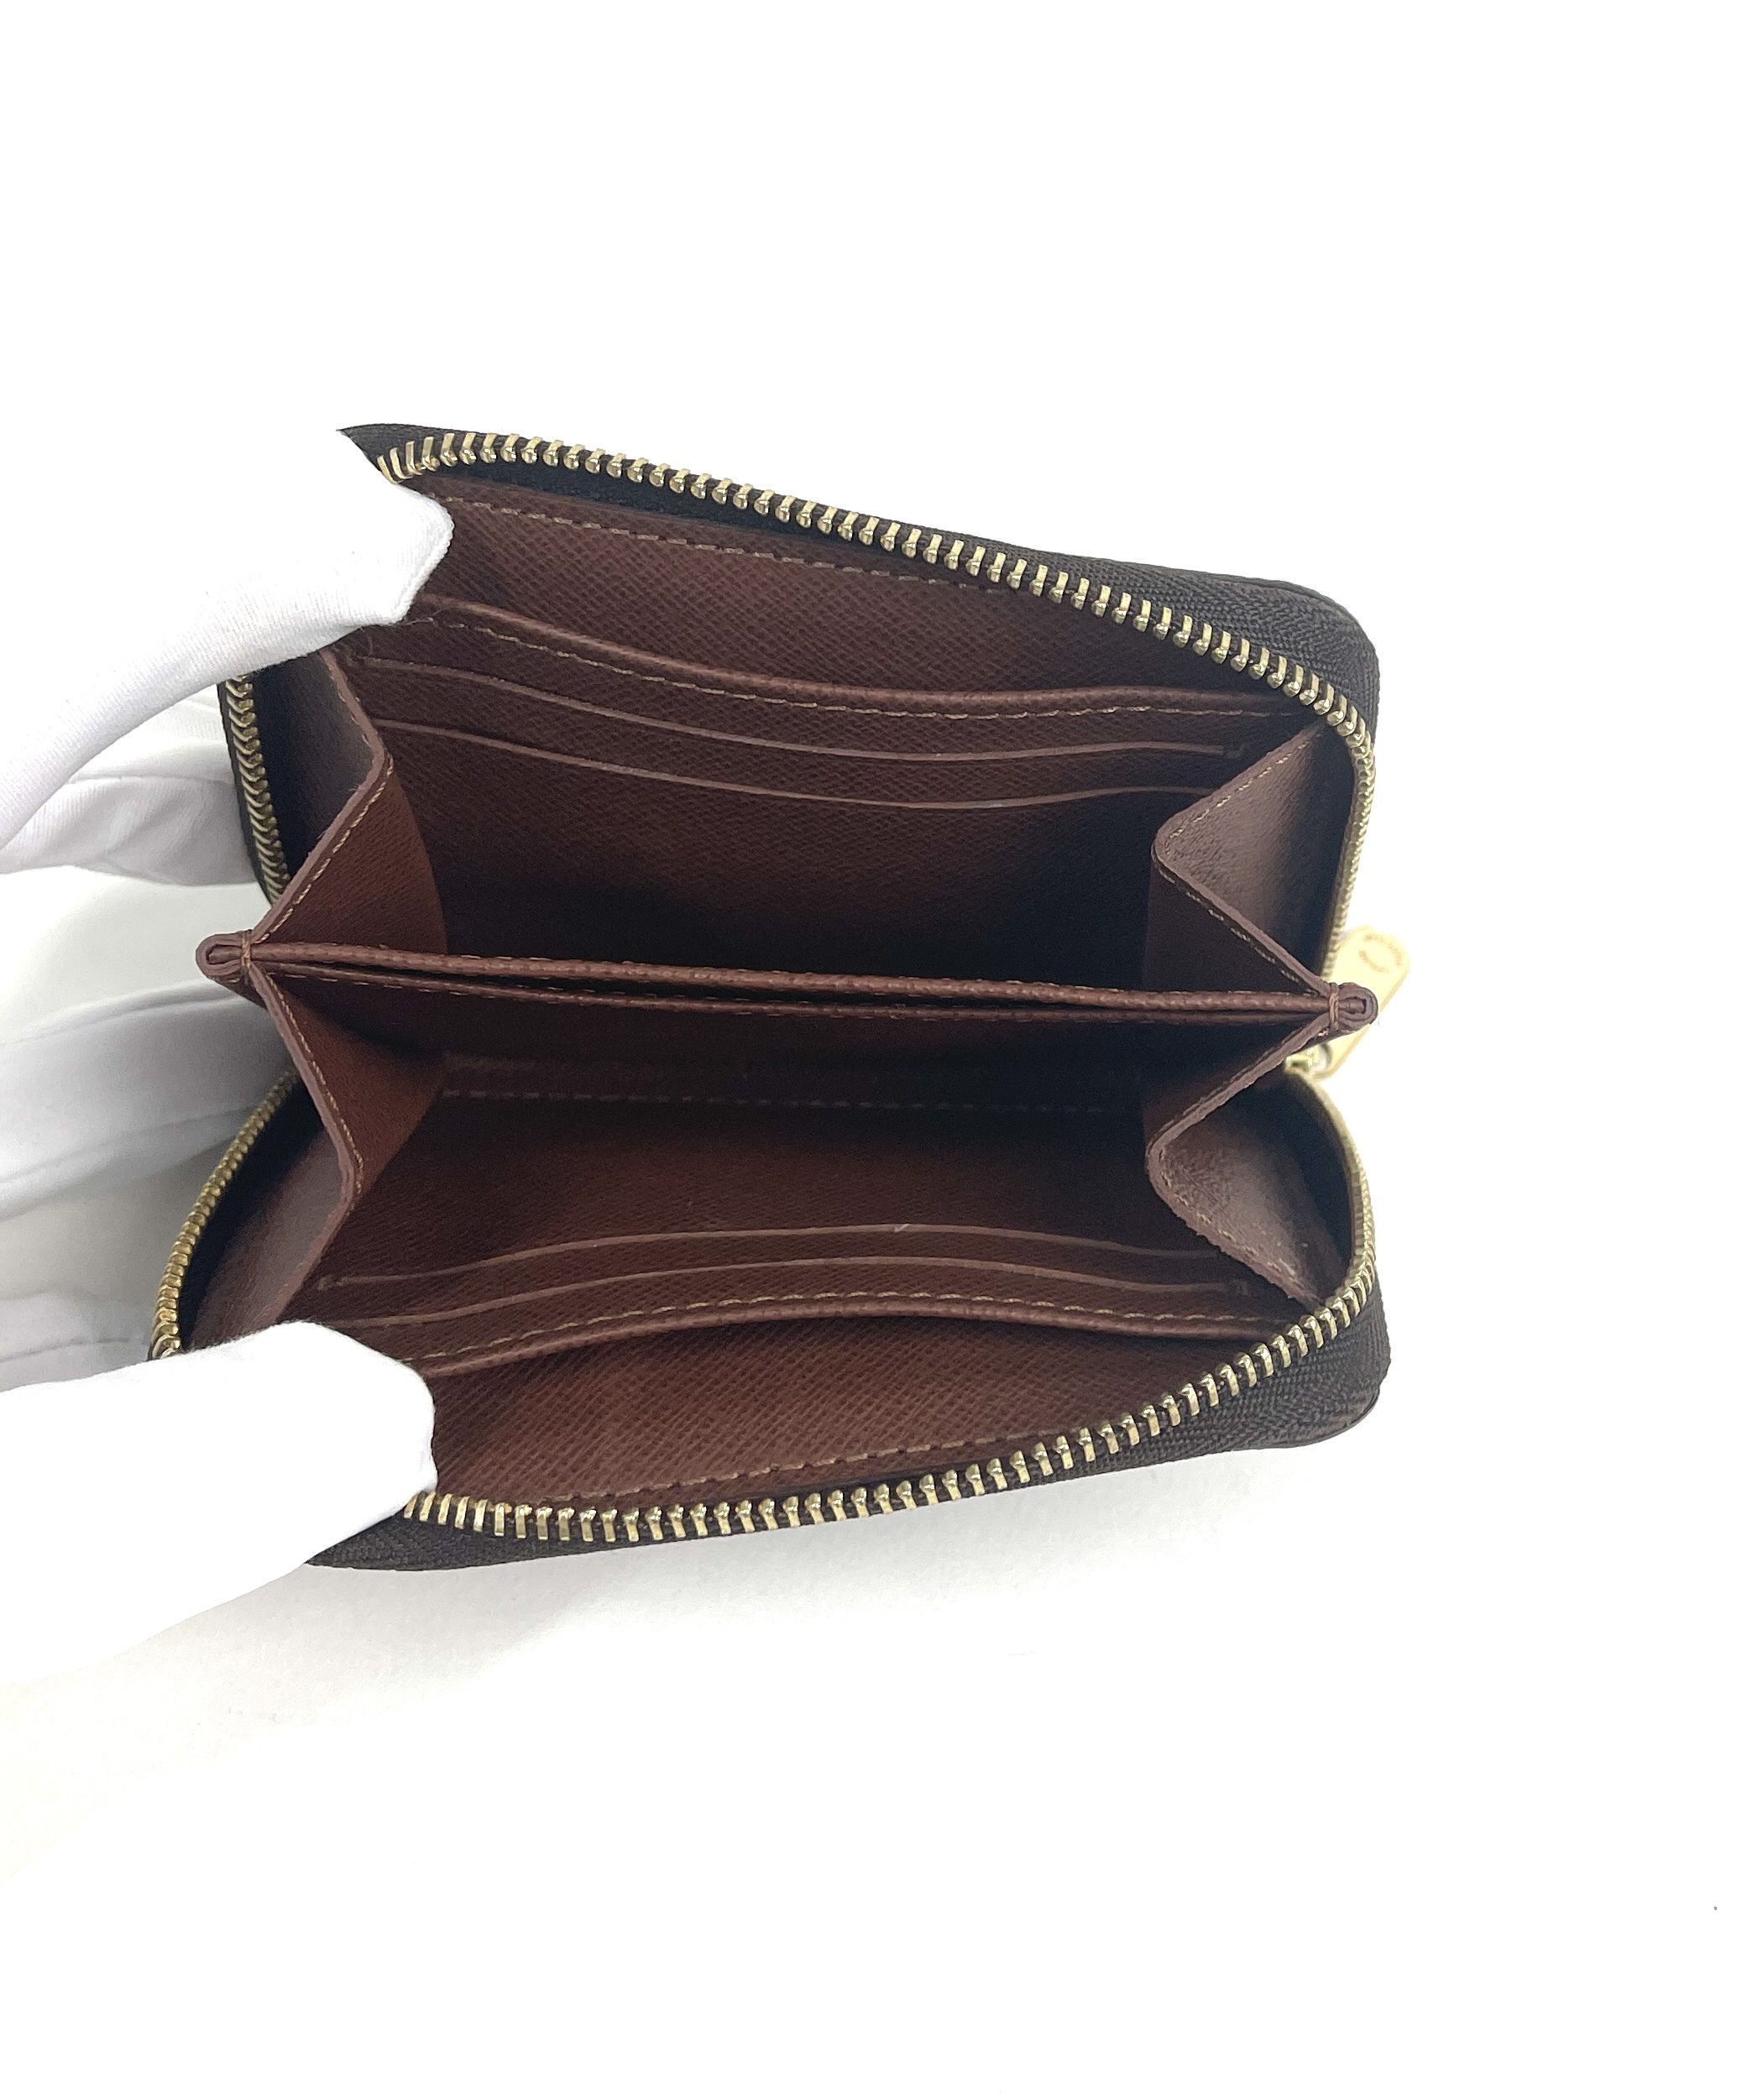 Shop Louis Vuitton ZIPPY COIN PURSE Unisex Leather Long Wallet Small Wallet  Coin Cases by meretvoyages